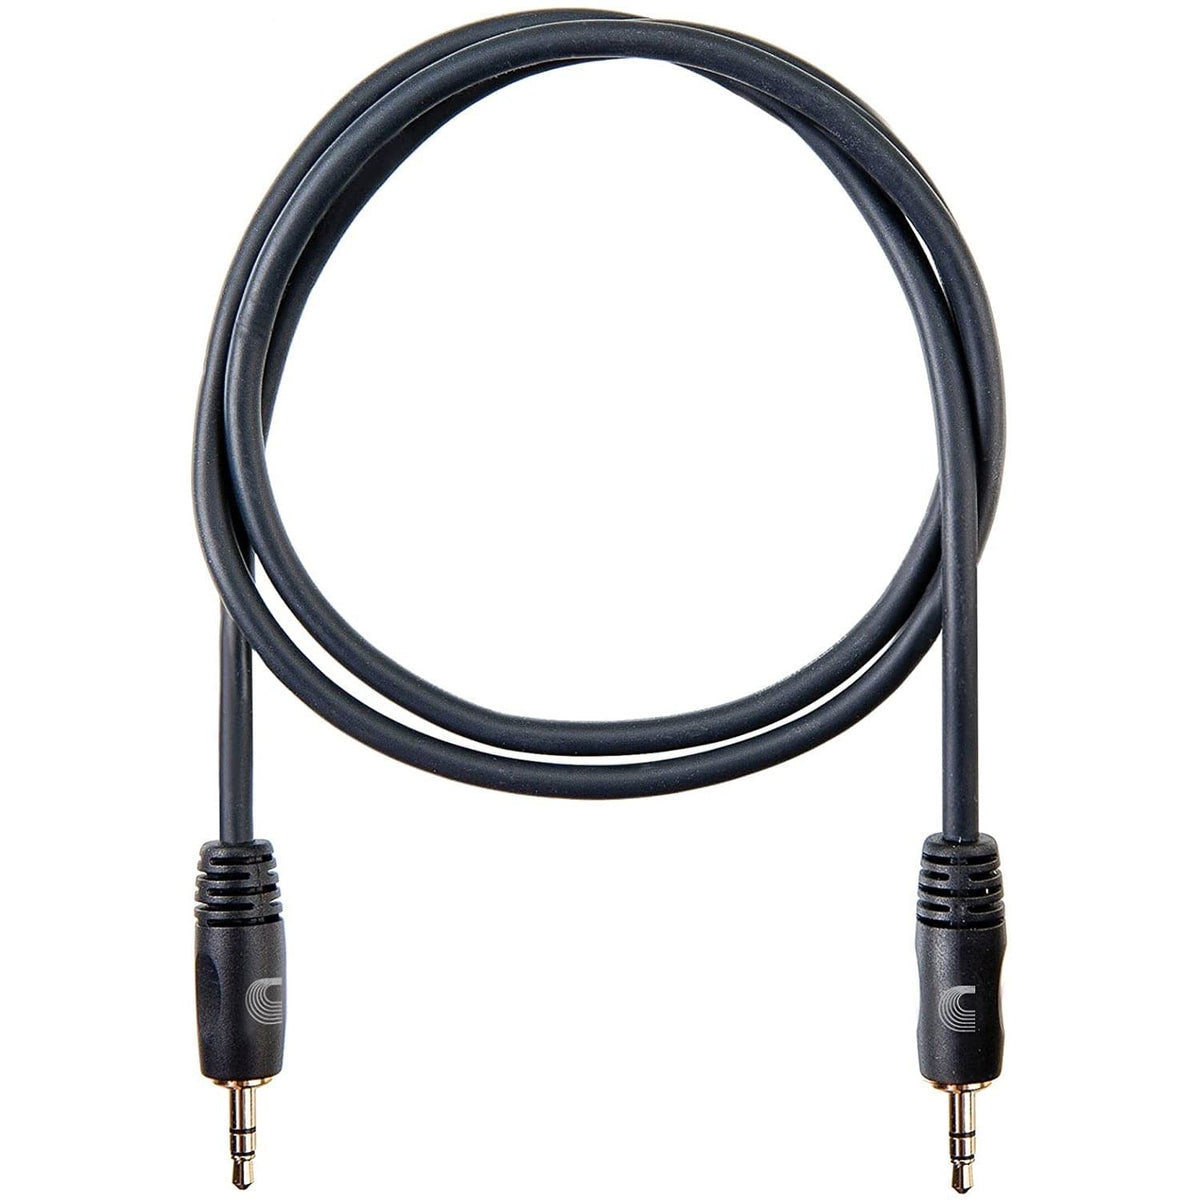 D'Addario Stereo Audio Cable 1/8" to 1/8" - 3ft